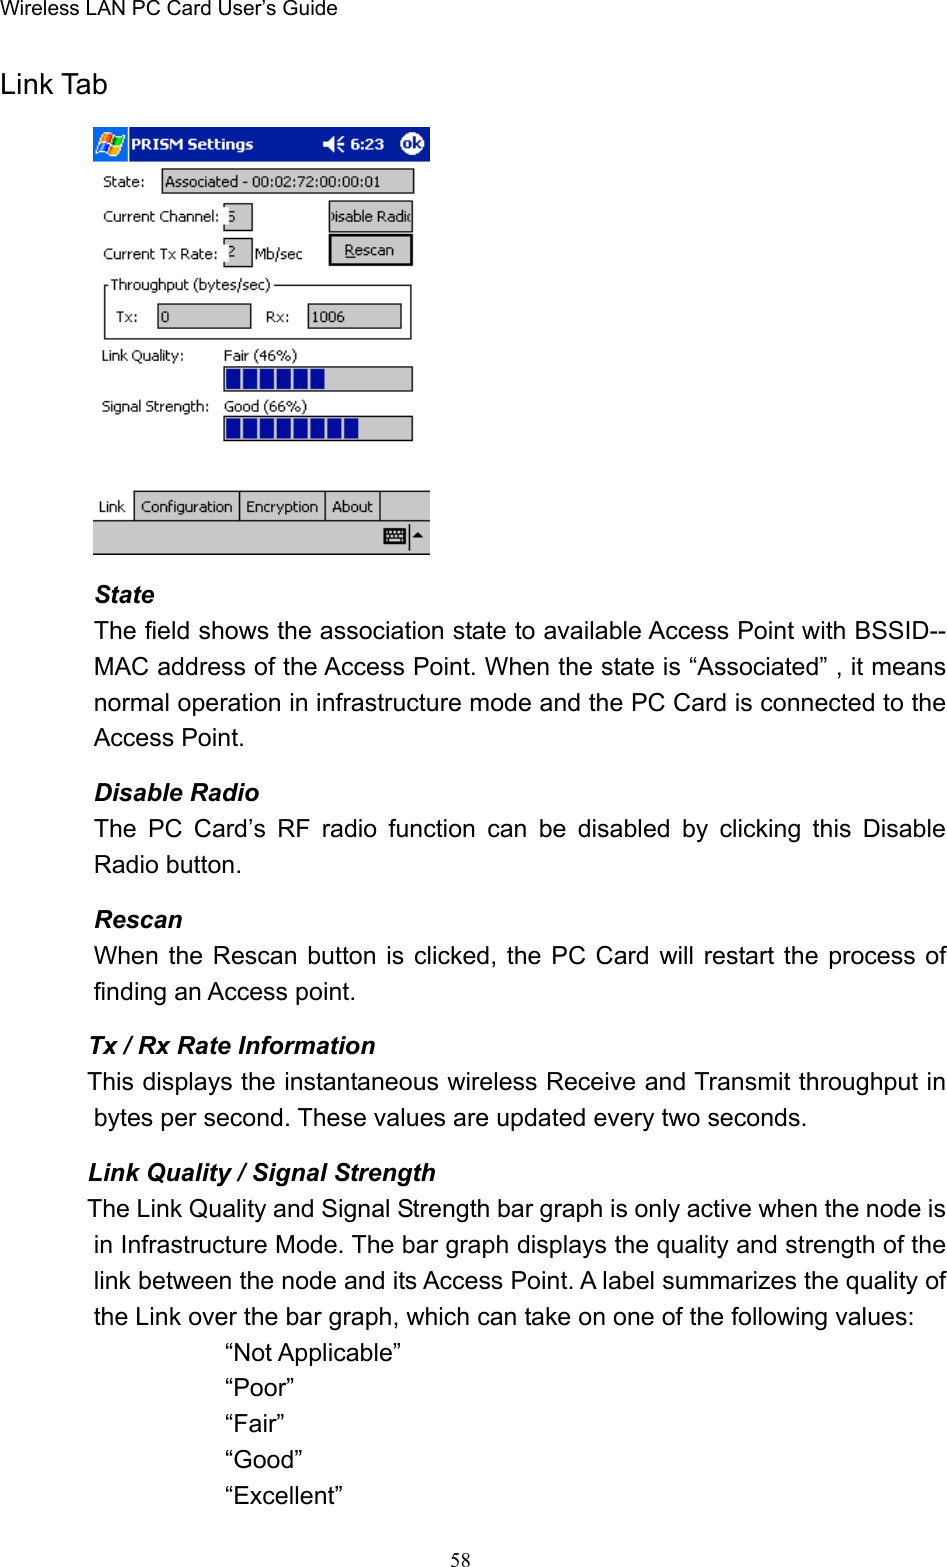 Wireless LAN PC Card User’s Guide58Link TabStateThe field shows the association state to available Access Point with BSSID--MAC address of the Access Point. When the state is “Associated” , it meansnormal operation in infrastructure mode and the PC Card is connected to theAccess Point.Disable RadioThe PC Card’s RF radio function can be disabled by clicking this DisableRadio button.RescanWhen the Rescan button is clicked, the PC Card will restart the process offinding an Access point.        Tx / Rx Rate Information       This displays the instantaneous wireless Receive and Transmit throughput inbytes per second. These values are updated every two seconds.       Link Quality / Signal Strength       The Link Quality and Signal Strength bar graph is only active when the node isin Infrastructure Mode. The bar graph displays the quality and strength of thelink between the node and its Access Point. A label summarizes the quality ofthe Link over the bar graph, which can take on one of the following values:“Not Applicable”“Poor”“Fair”“Good”“Excellent”